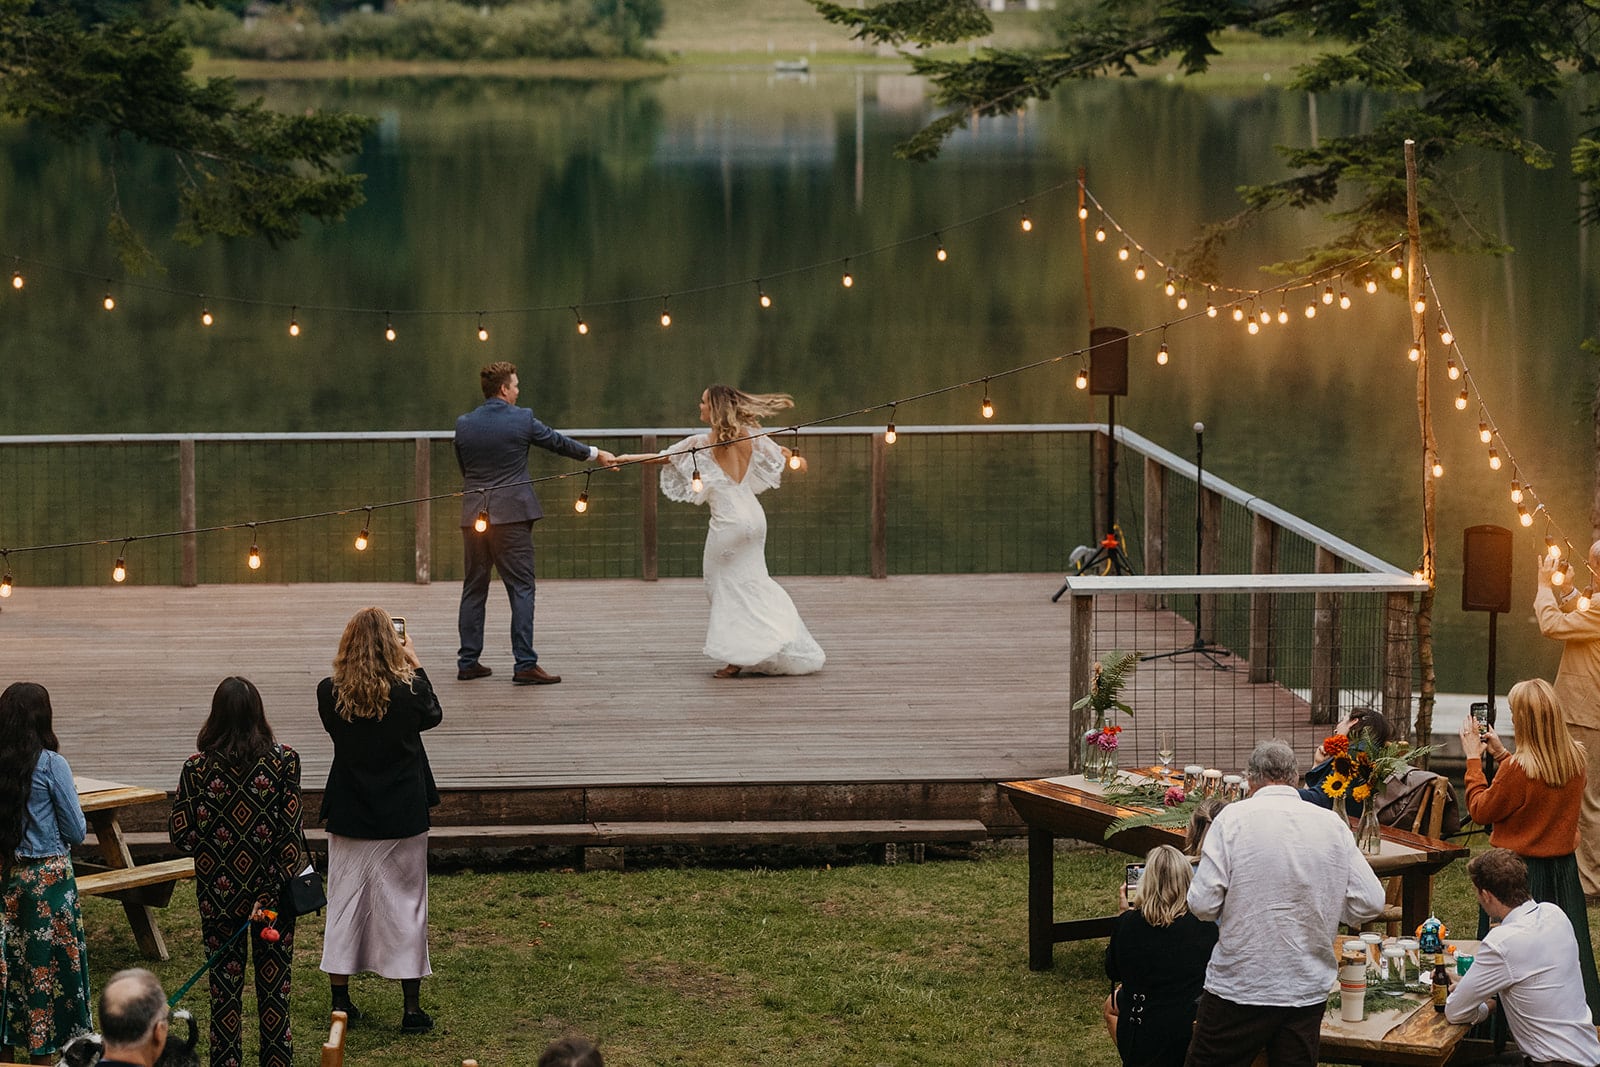 A couple shares their first dance at dusk on the deck of Camp Saturna.